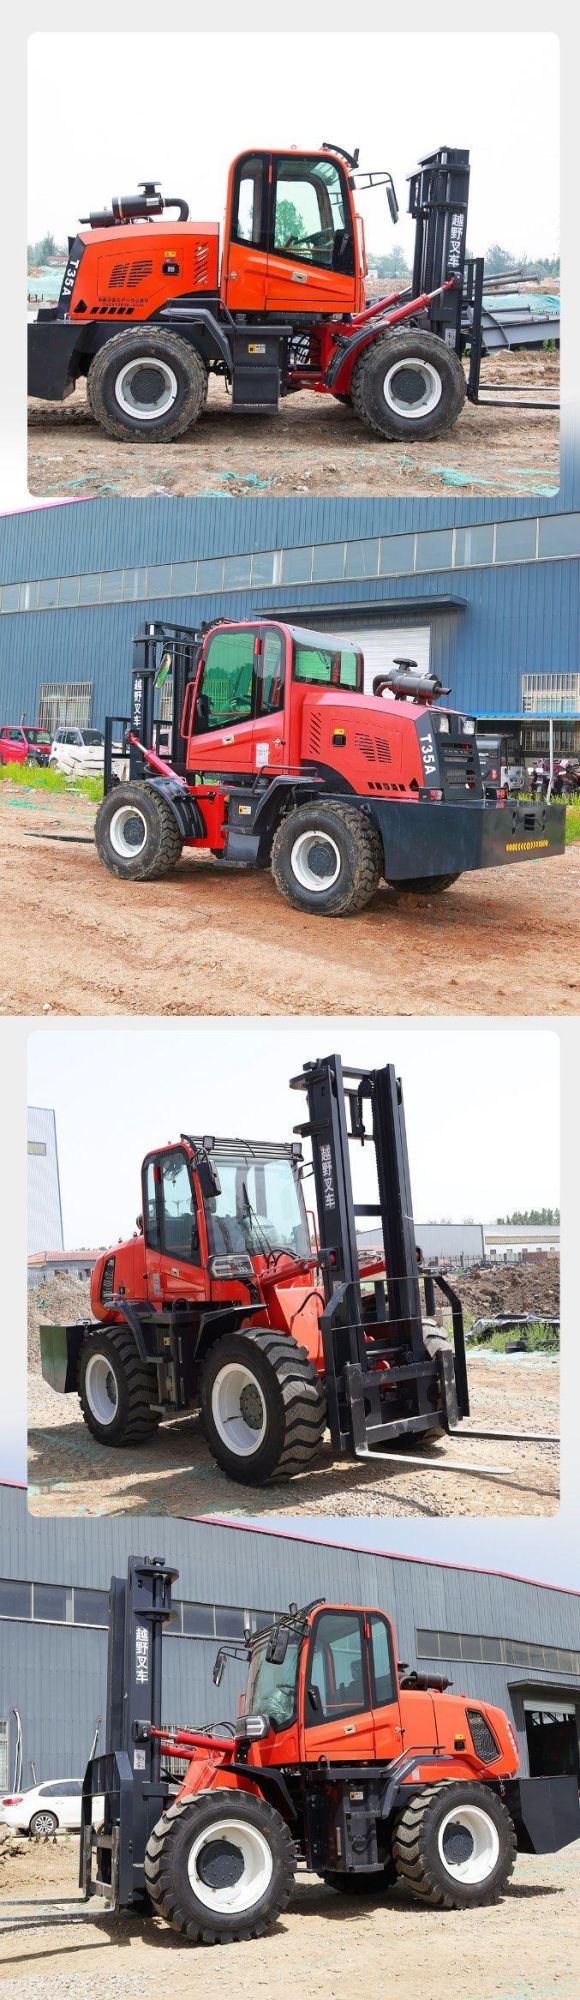 Spot China Diesel Version of Cross-Country Forklift 3.0 Ton 3.5 Ton Sale Capacity Fork Lift Truck Forklift